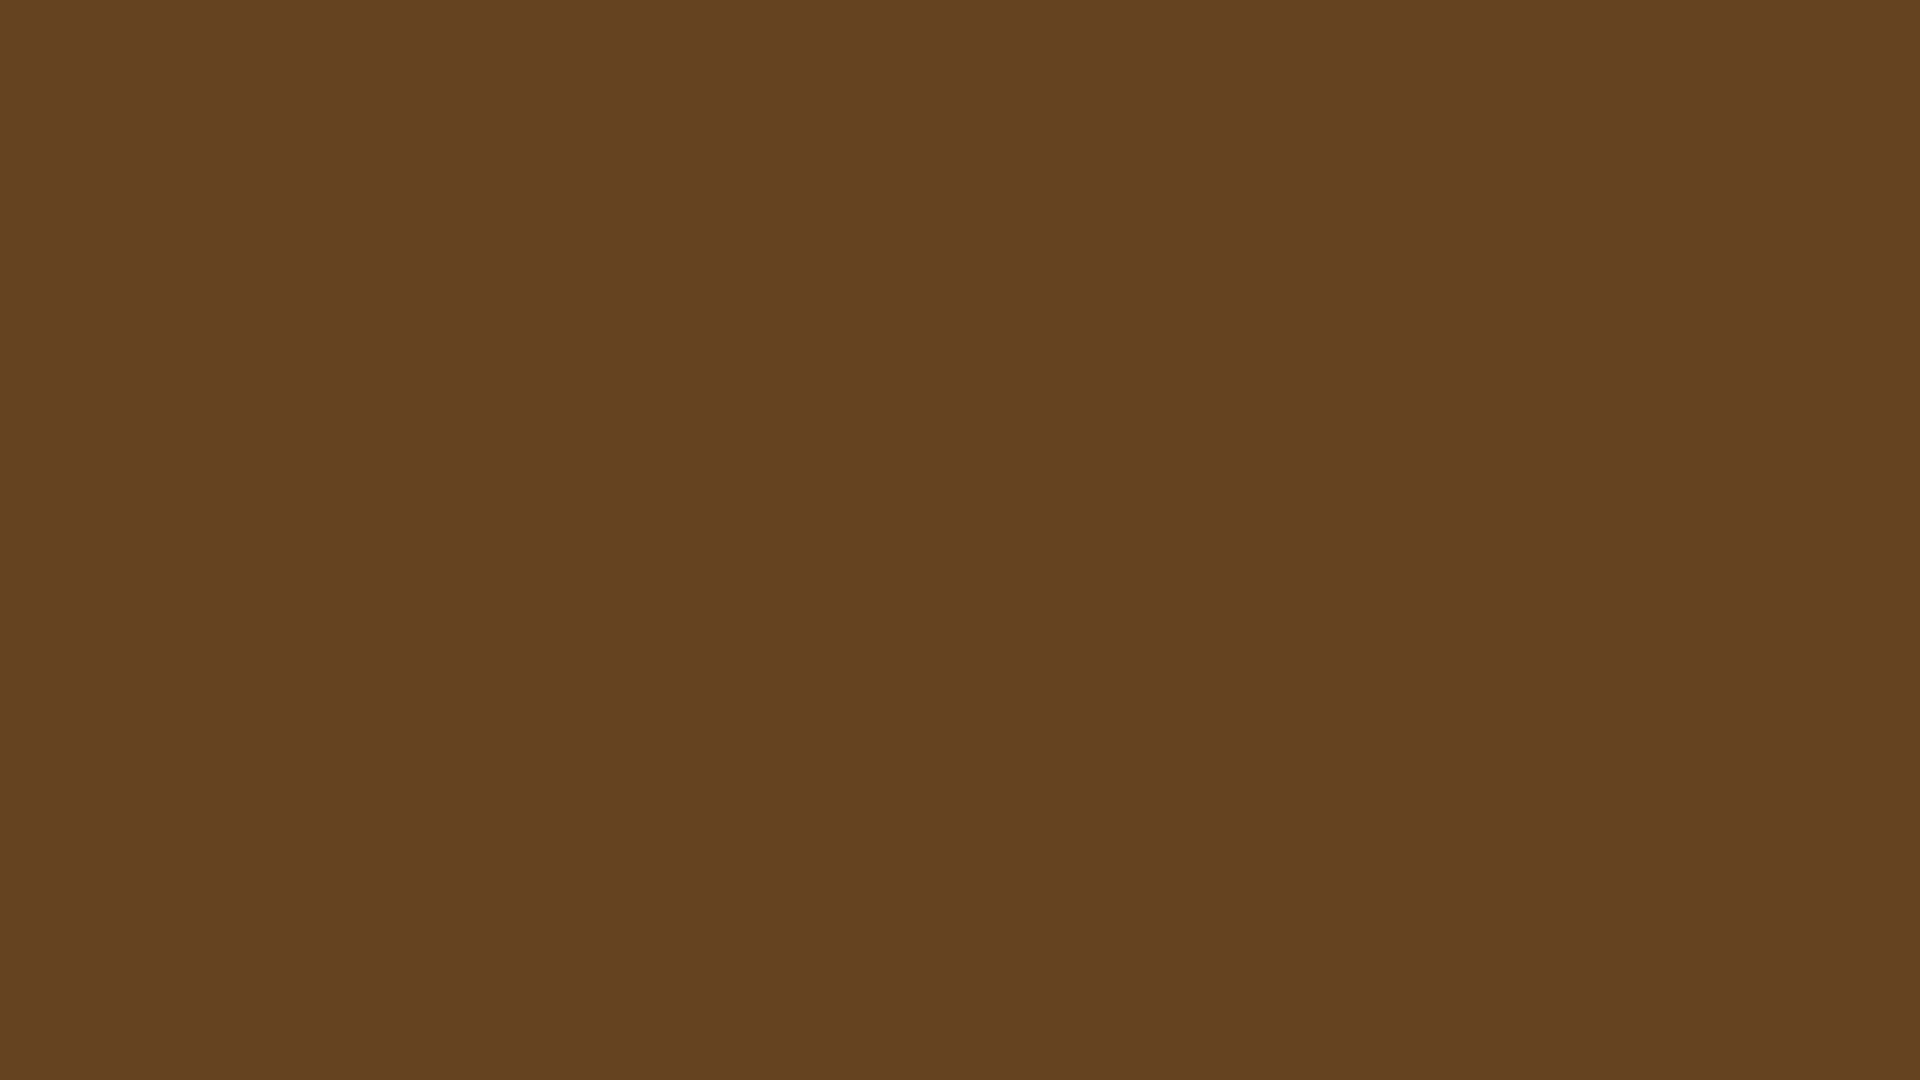 1920x1080 Otter Brown Solid Color Background